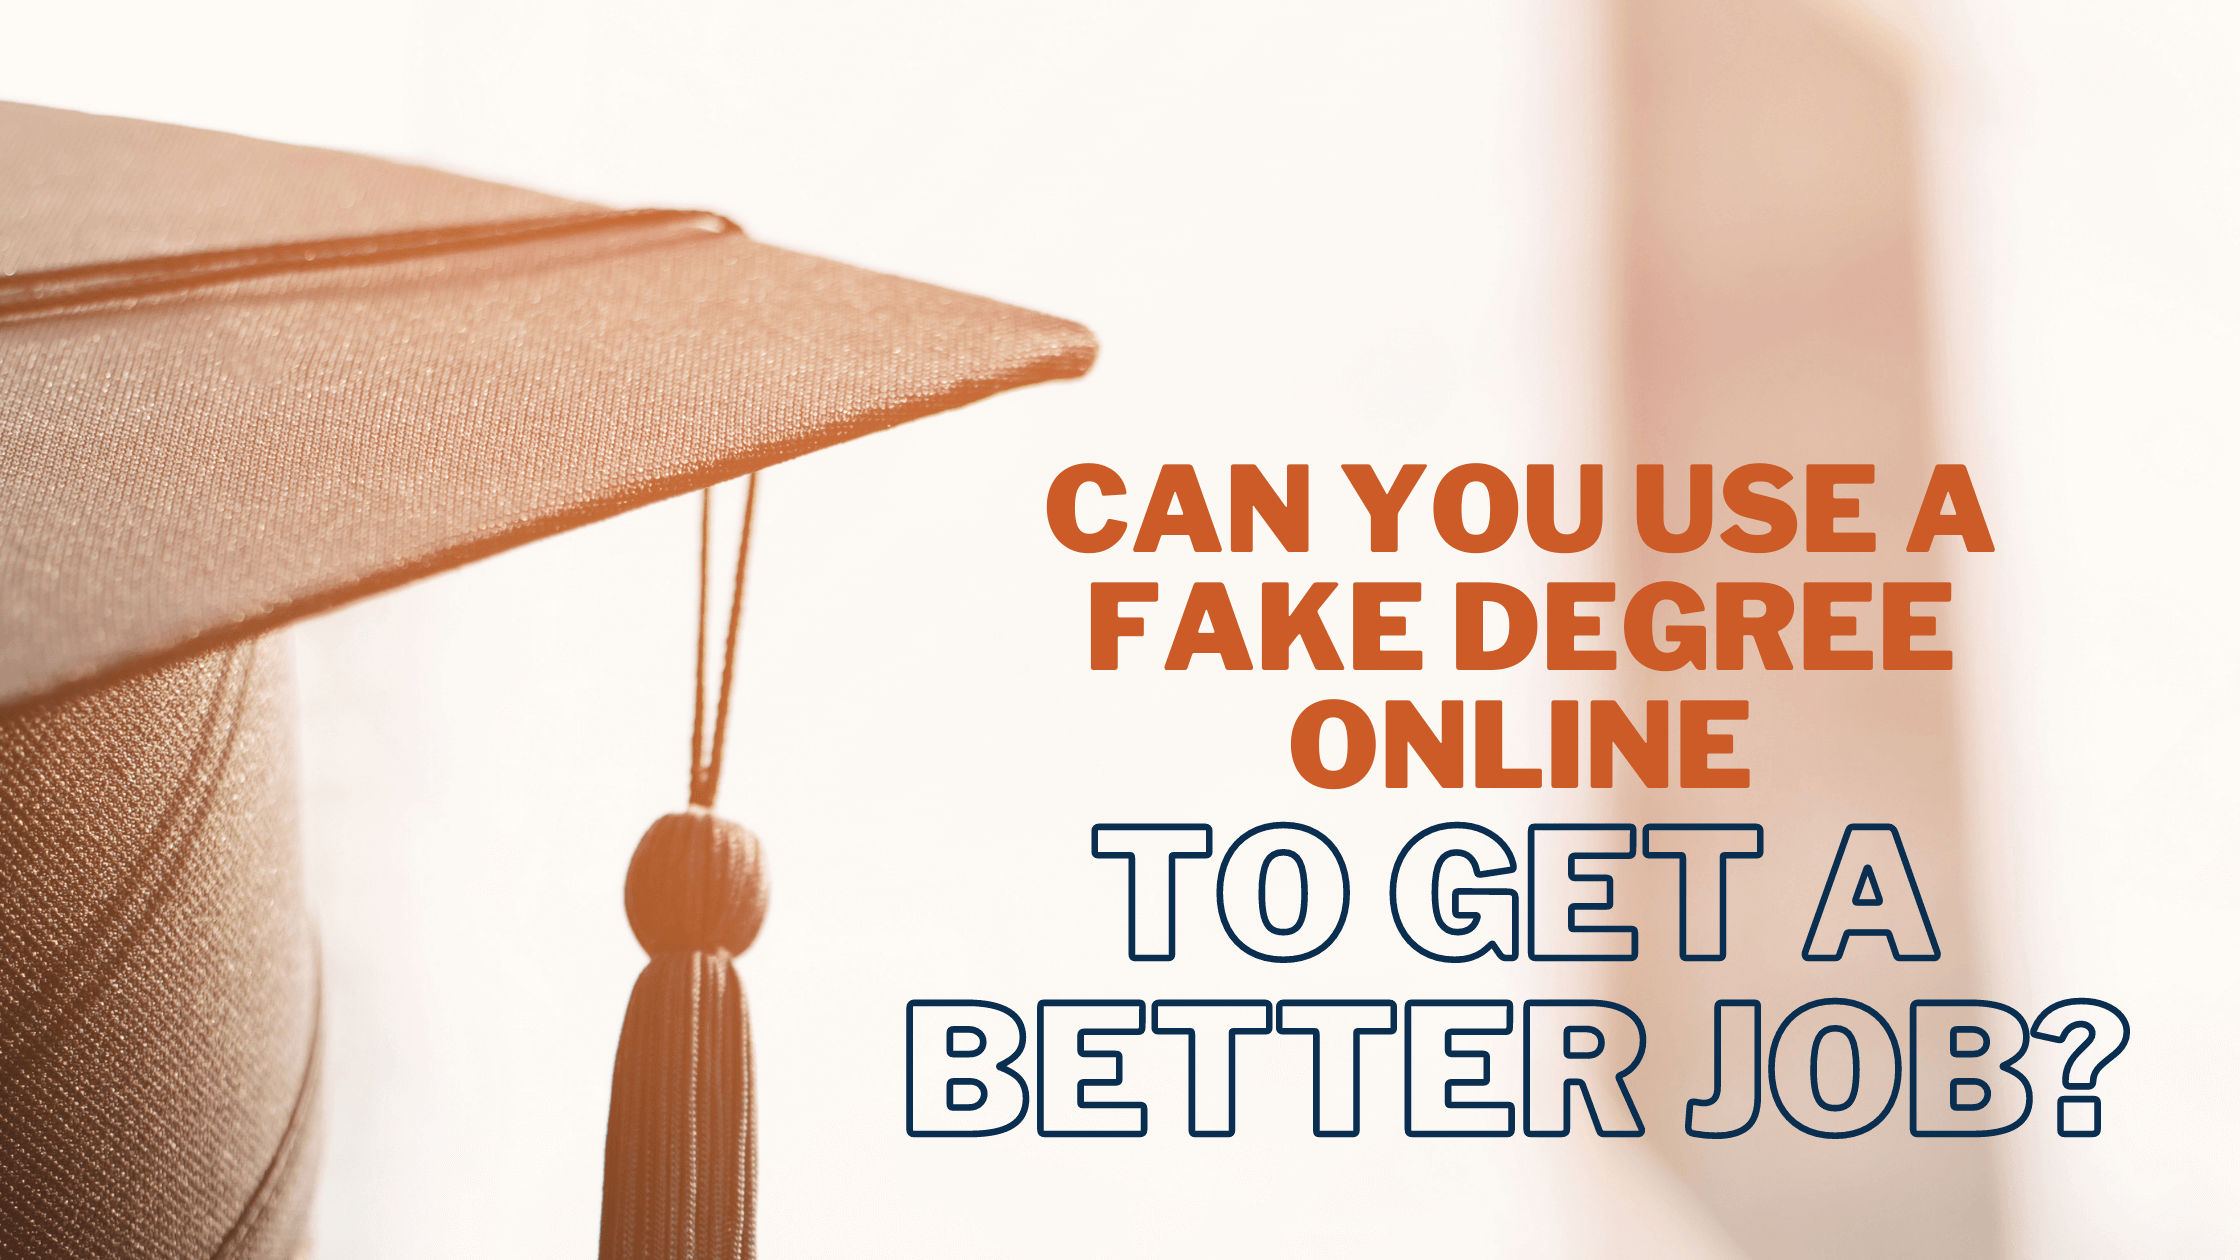 Buy Fake Degree Online To Obtain a New Better Job,Fake Diploma With Bitcoin